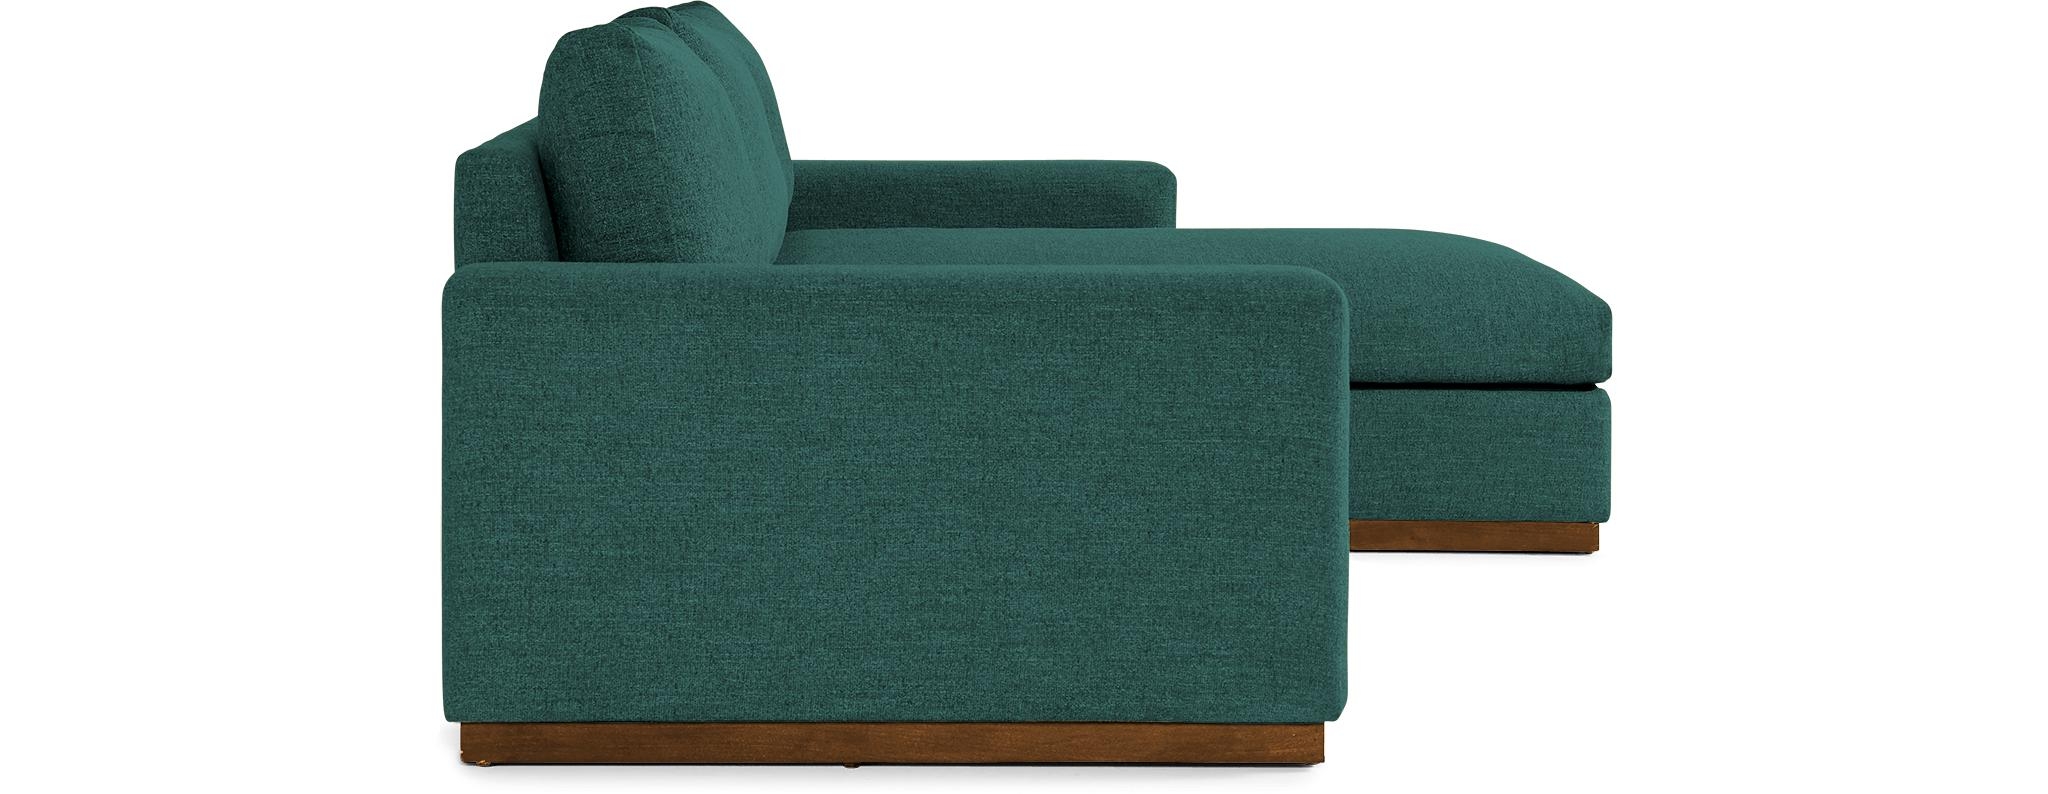 Blue Holt Mid Century Modern Sectional with Storage - Prime Peacock - Mocha - Left - Image 2